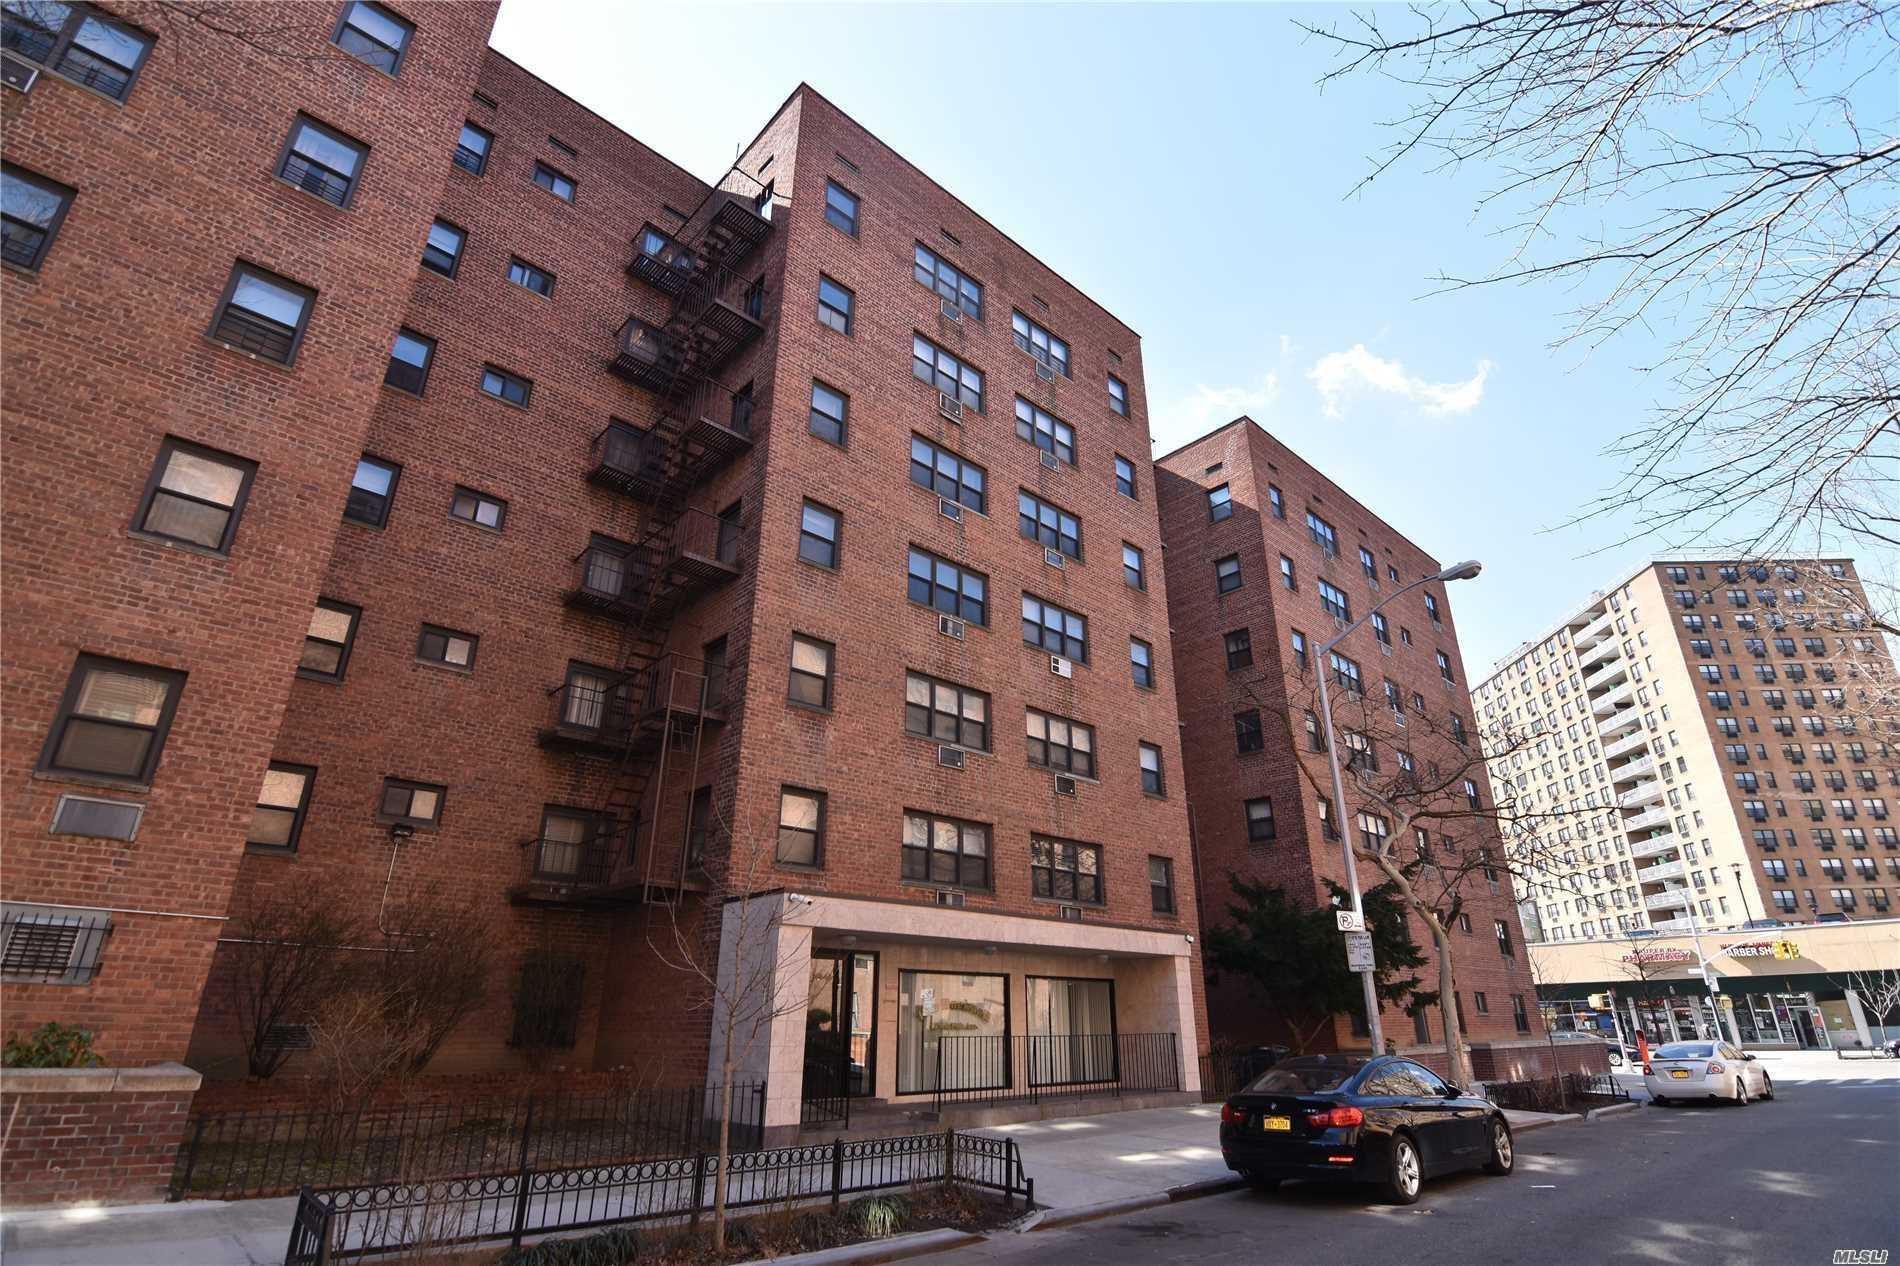 Sale may be subject to term & conditions of an offering plan.  This Studio apartment was totally renovated 5 years ago with New hardwood floor,  kitchen and bathroom. Maintenance fee includes all utilities. Close to all major highways and buses to NYC.  7 Minutes walk to Rego shopping Center and Walking distance to Queens Center Mall. Private Parking (waiting list).